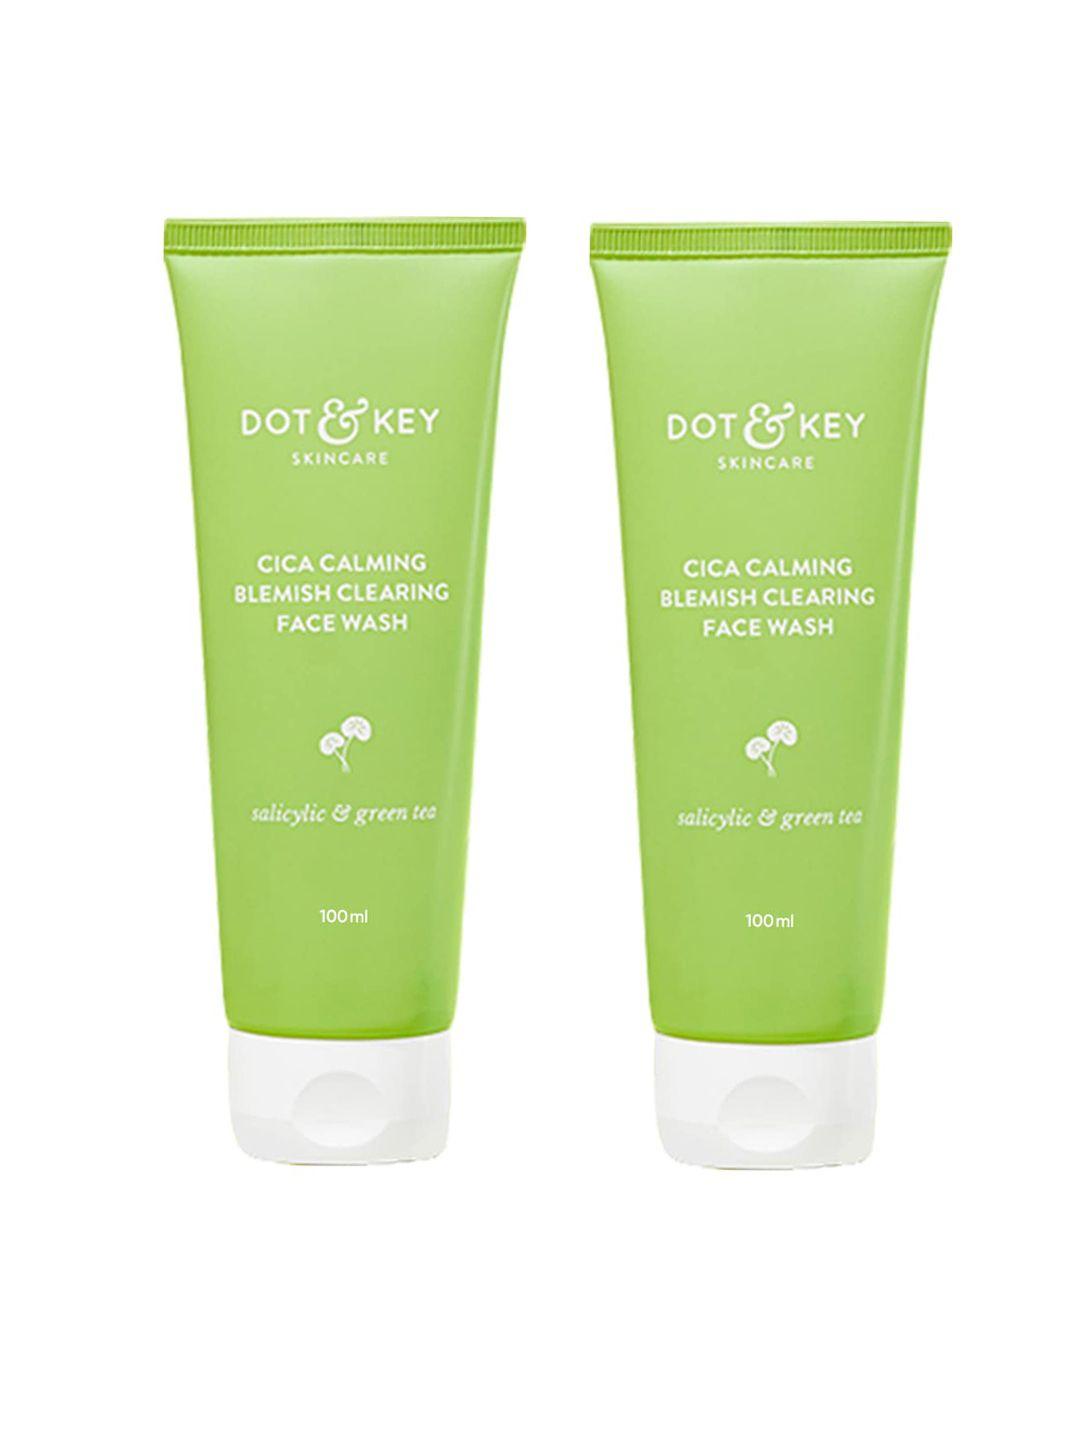 dot-&-key-pack-of-cica-acne-free-blemish-clearing-face-wash-with-salicylic-acid--200ml